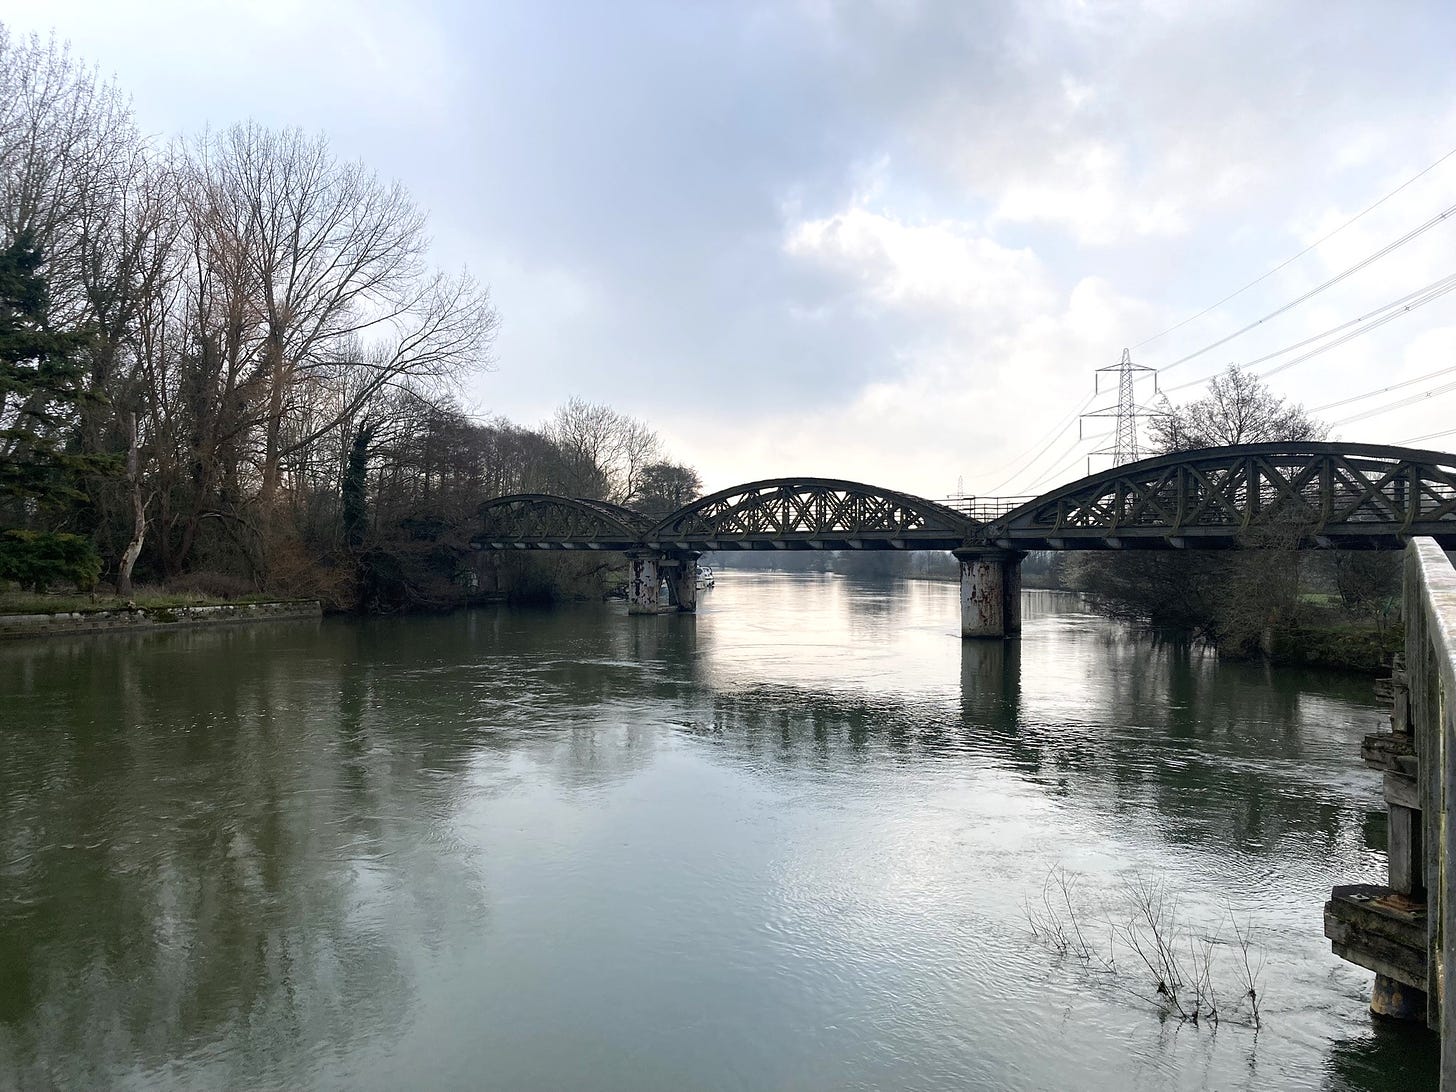 Old rail bridge over the River Isis. It's a blue-grey day, which is reflected in the water.